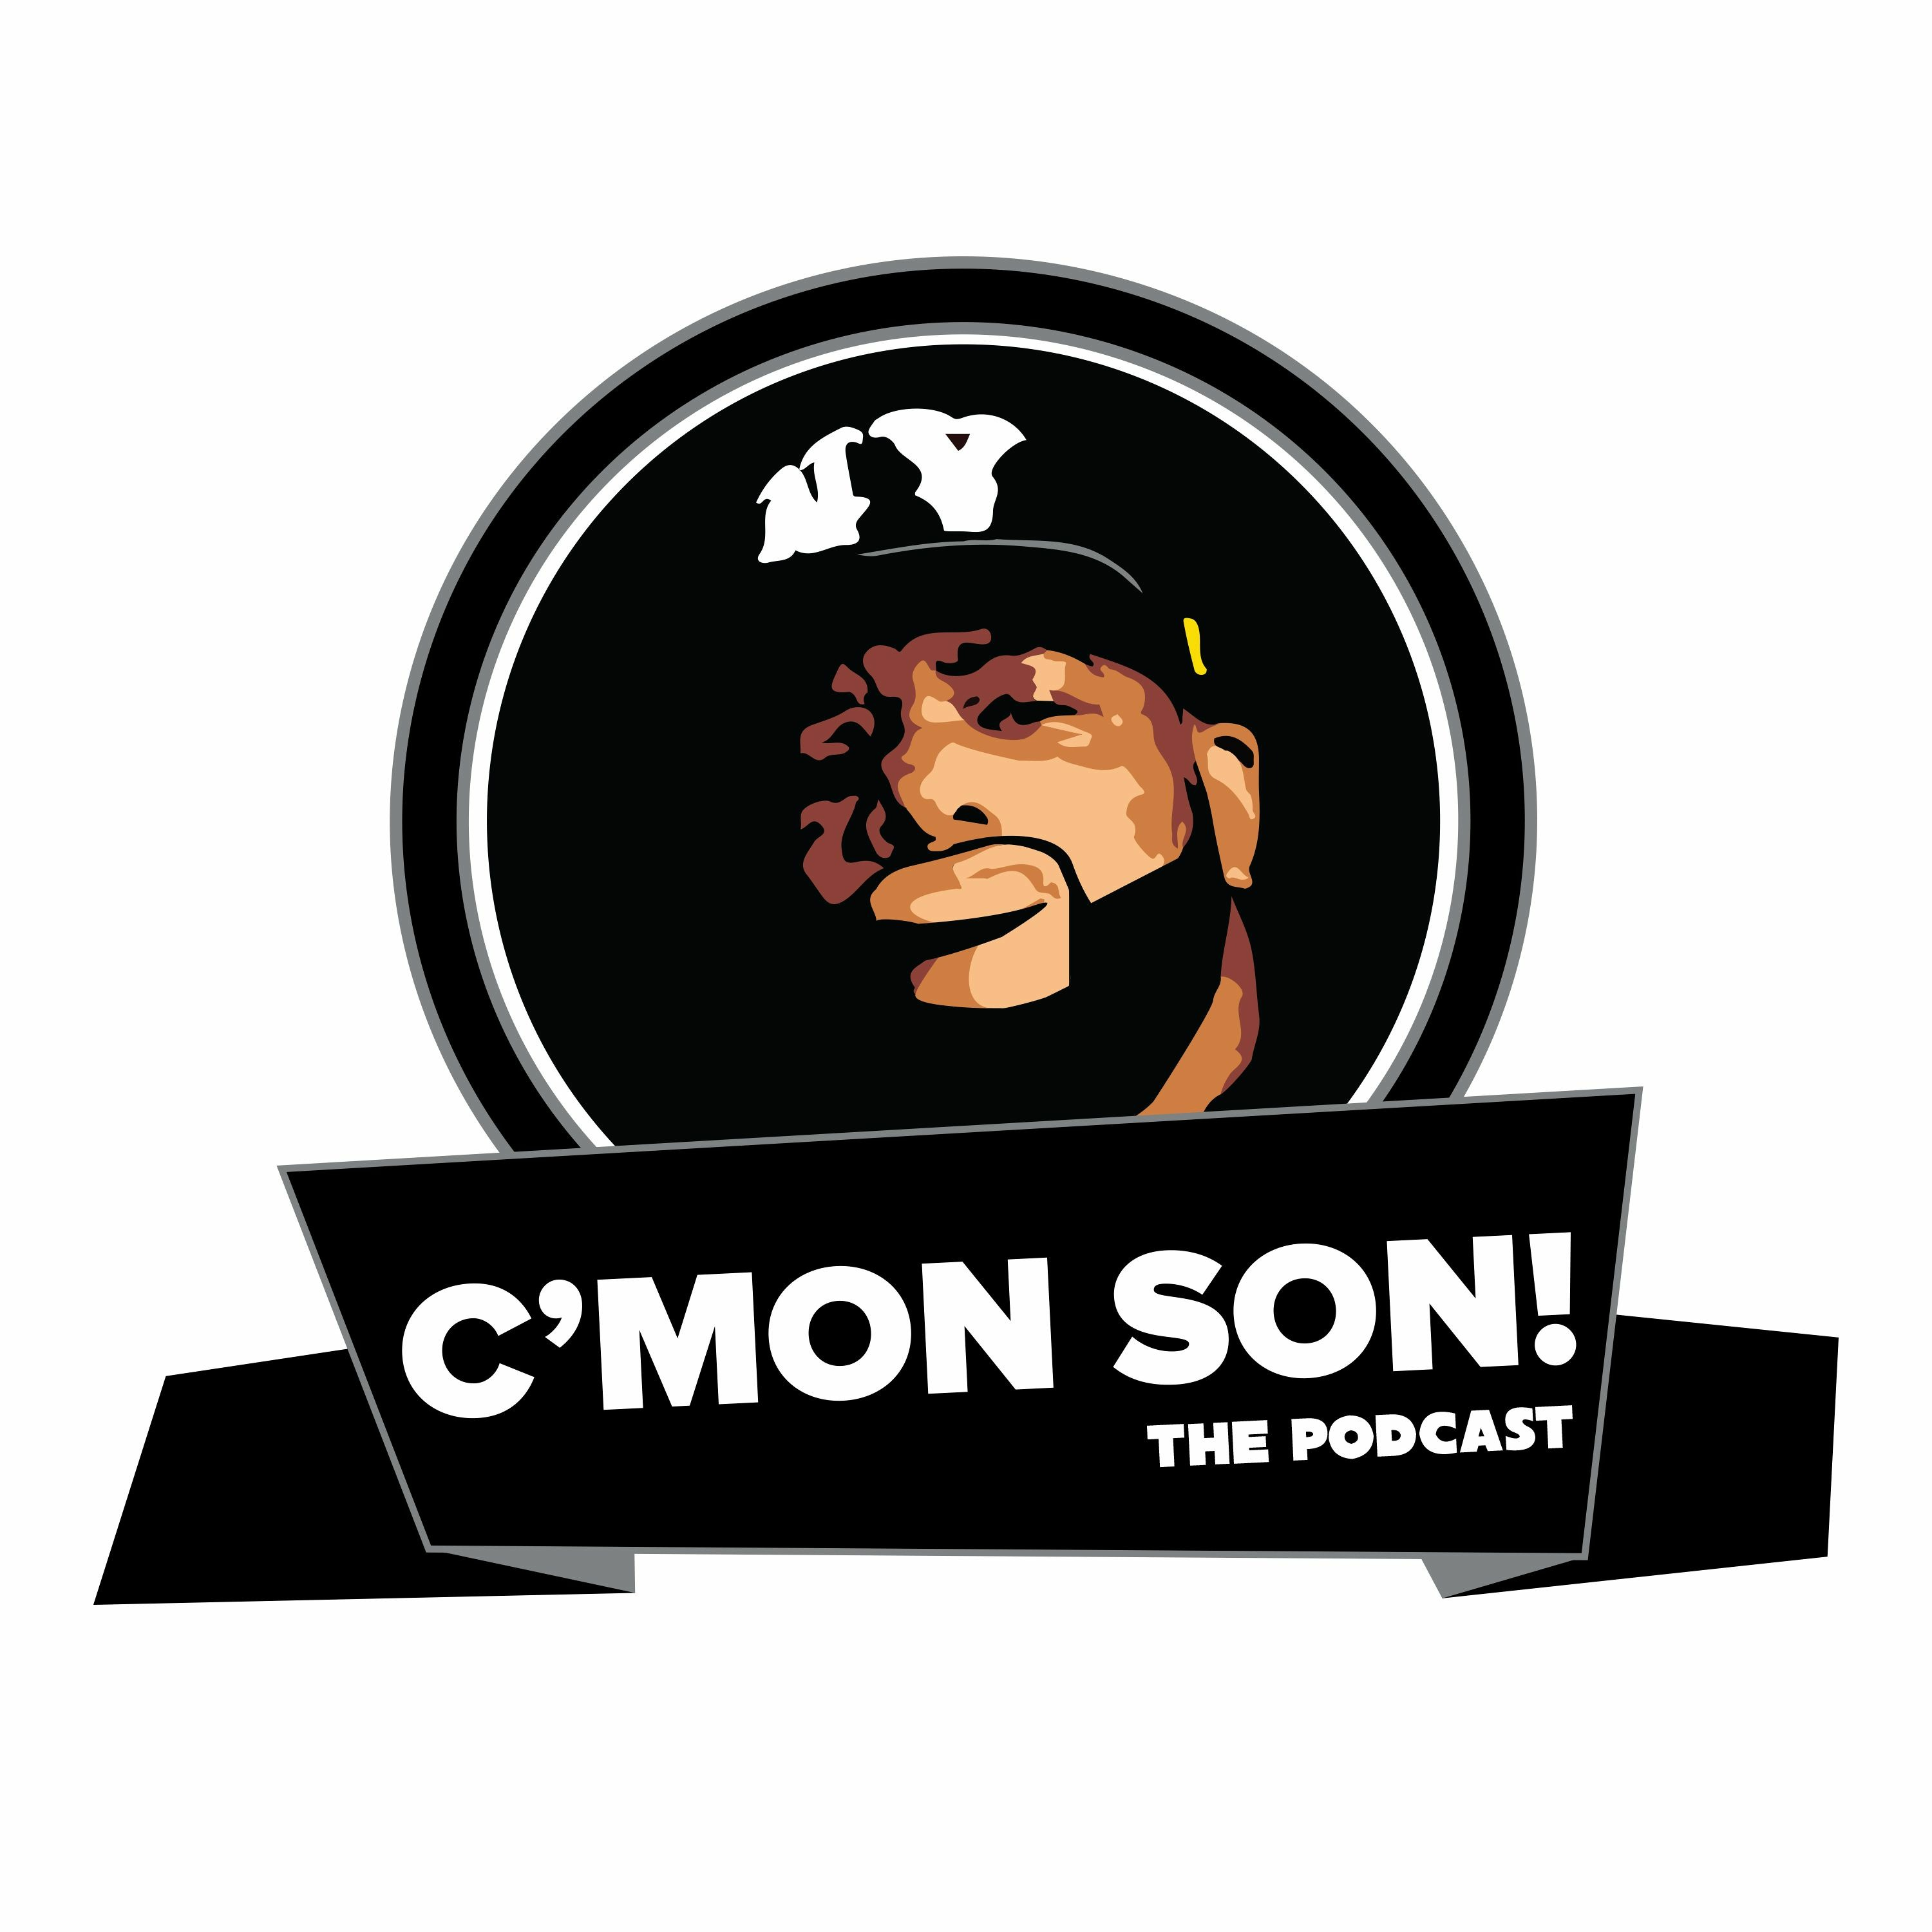 Ep. #191: Remembering Heavy D Ten Years Later | C'Mon Son! Roast ft. Aaron Rodgers & More